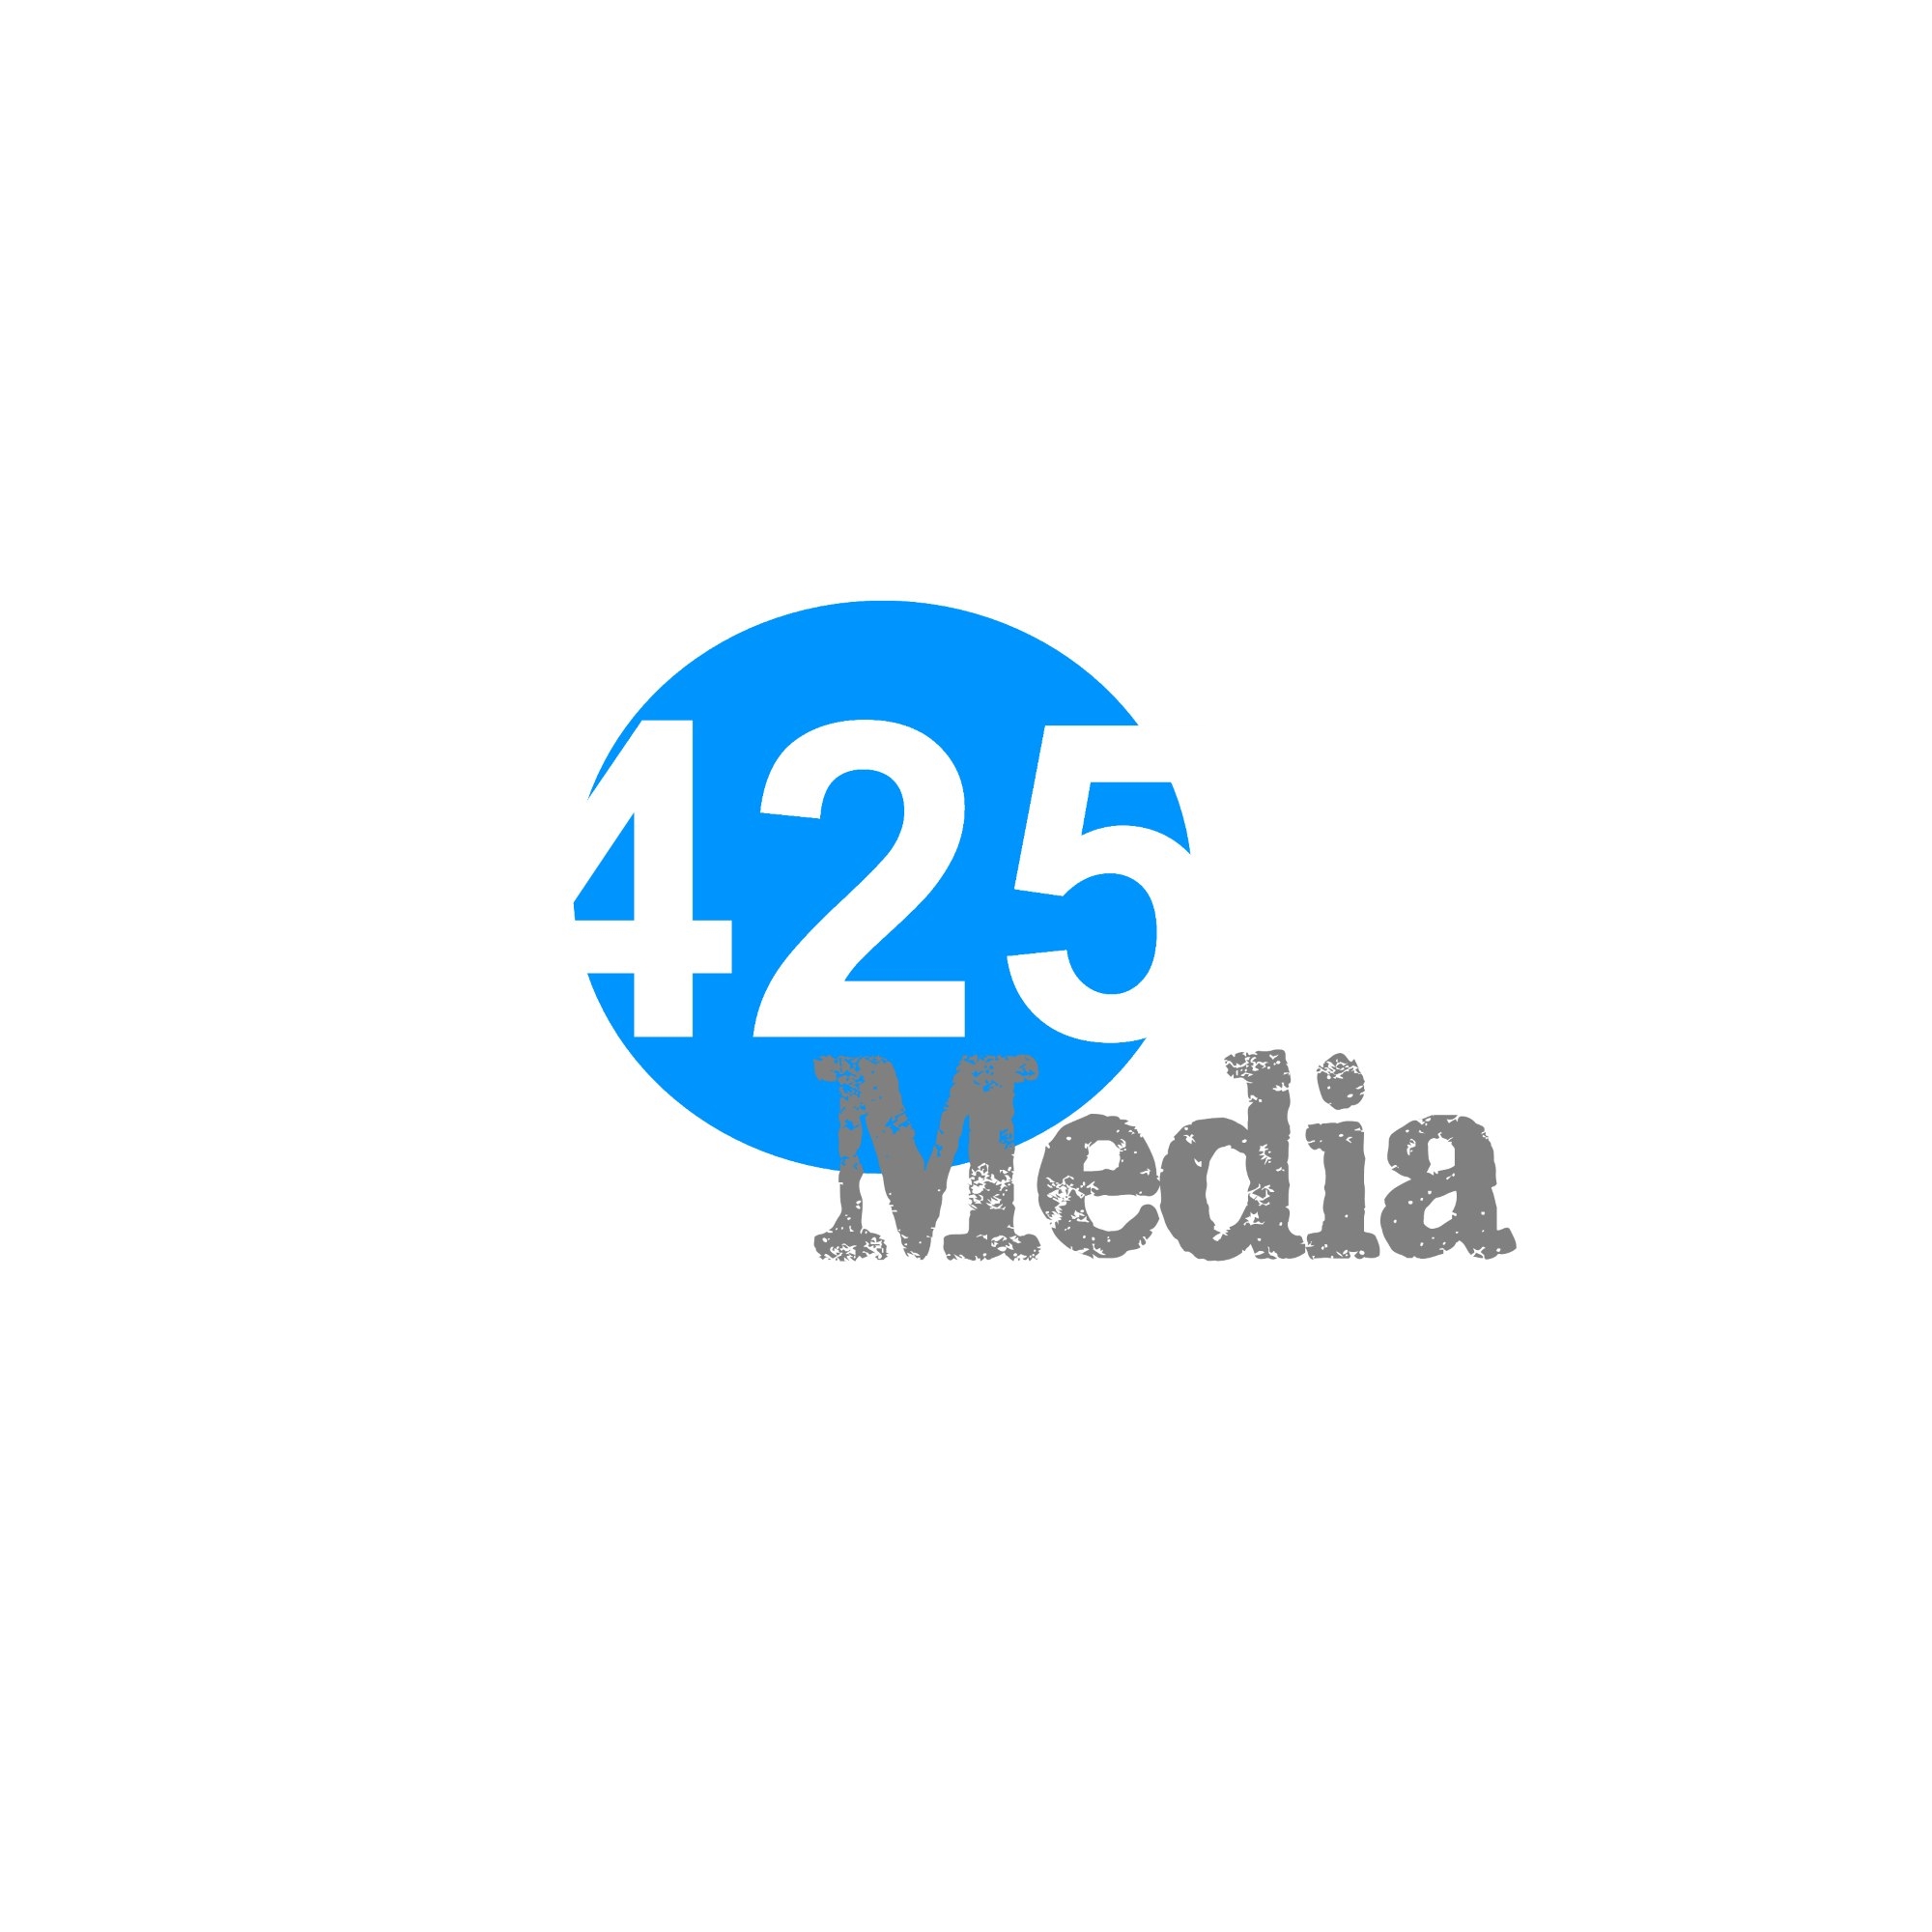 425 Media - Eastside small business marketing - Bothell, Woodinville, Kenmore